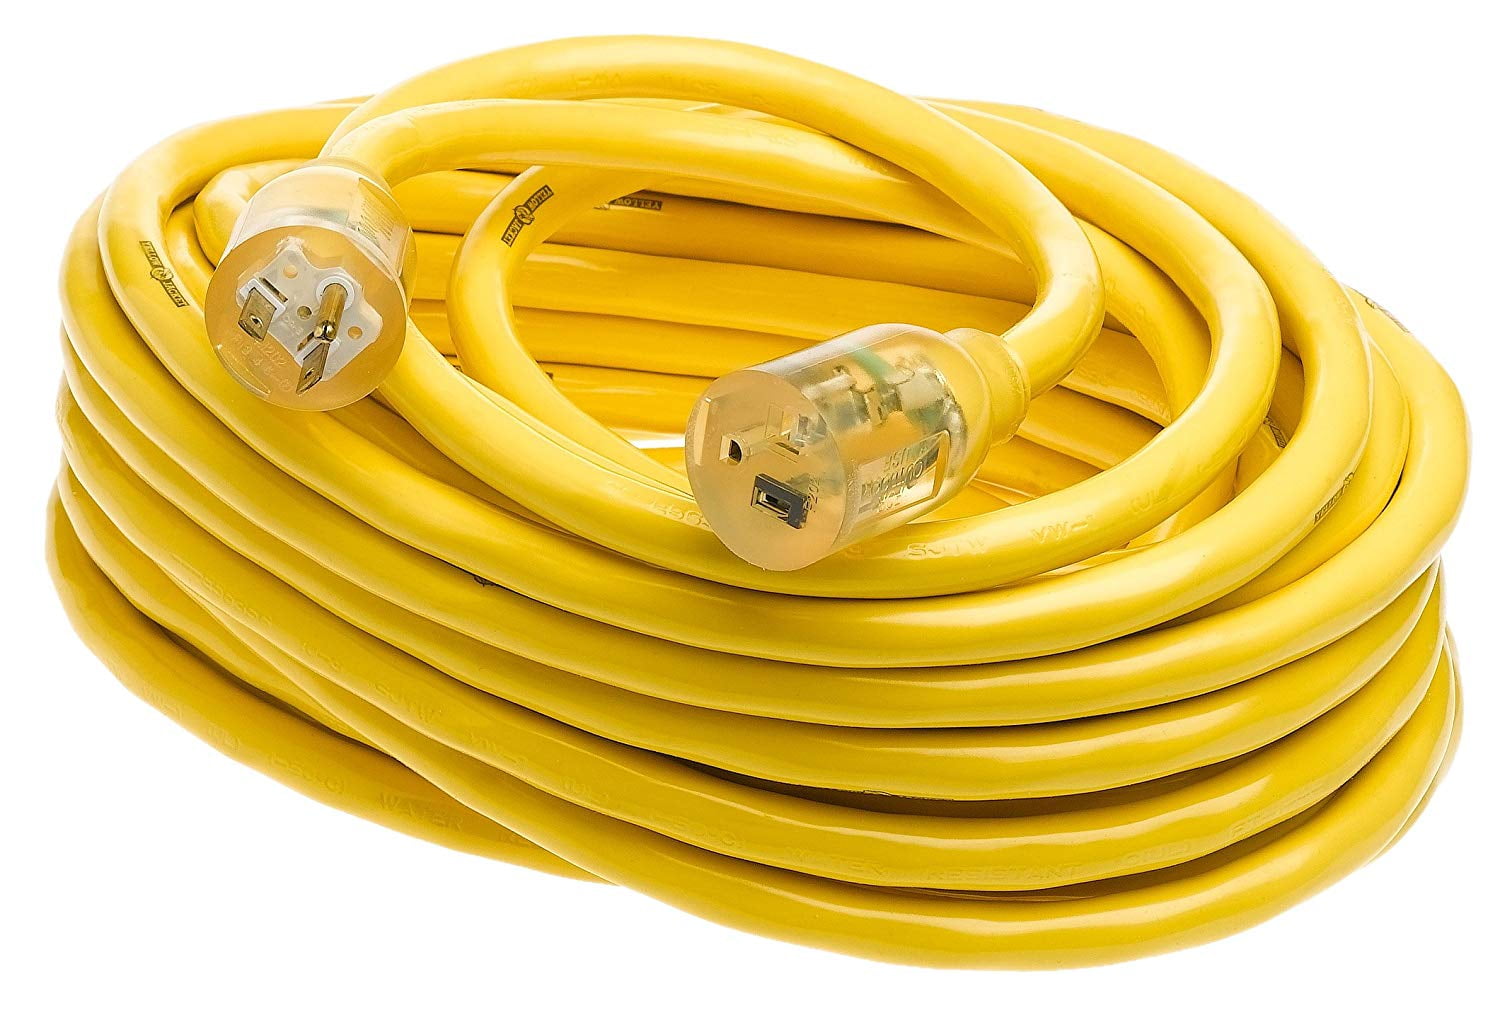 feet non-lit end 50 ft Extension Cord 16 gauge AWG Heavy Duty Yellow 50' foot 